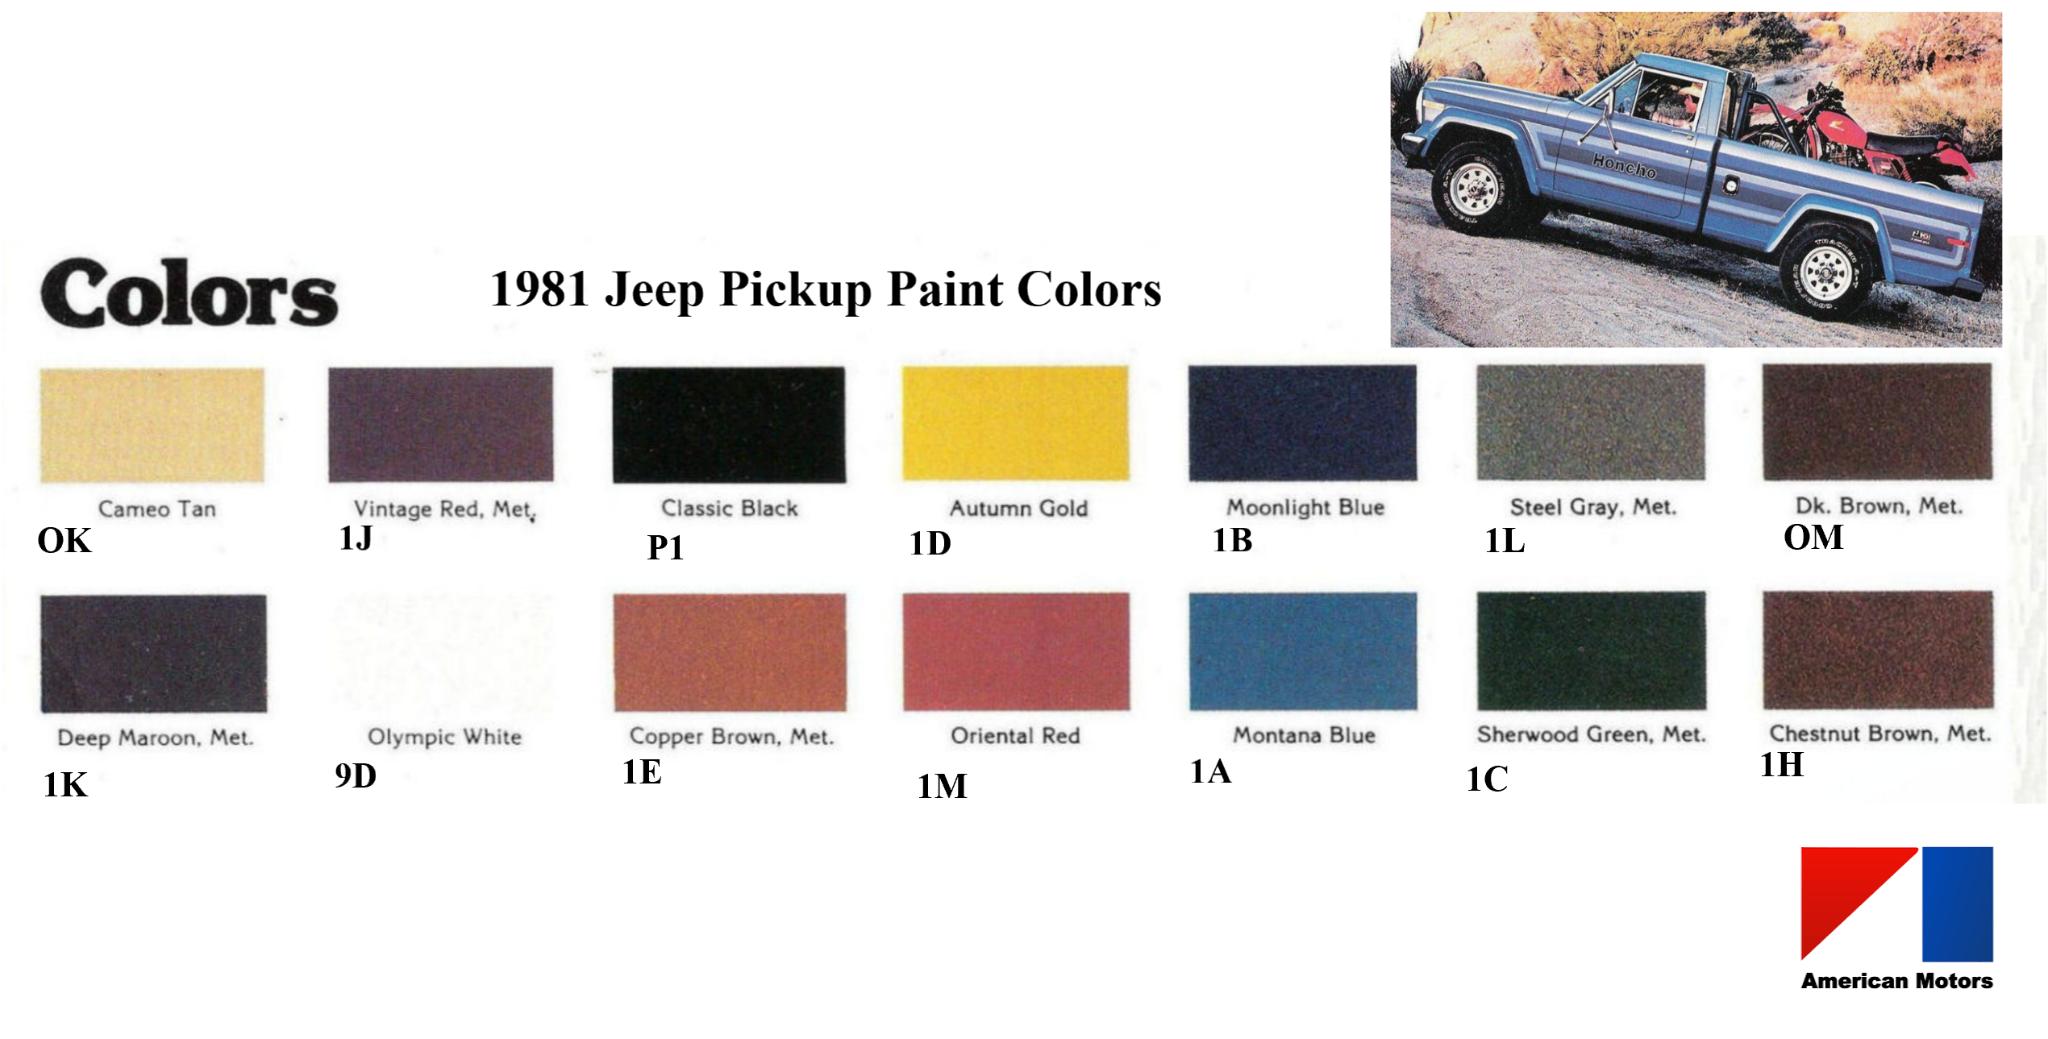 Colors used on Jeep Pickups in 1981